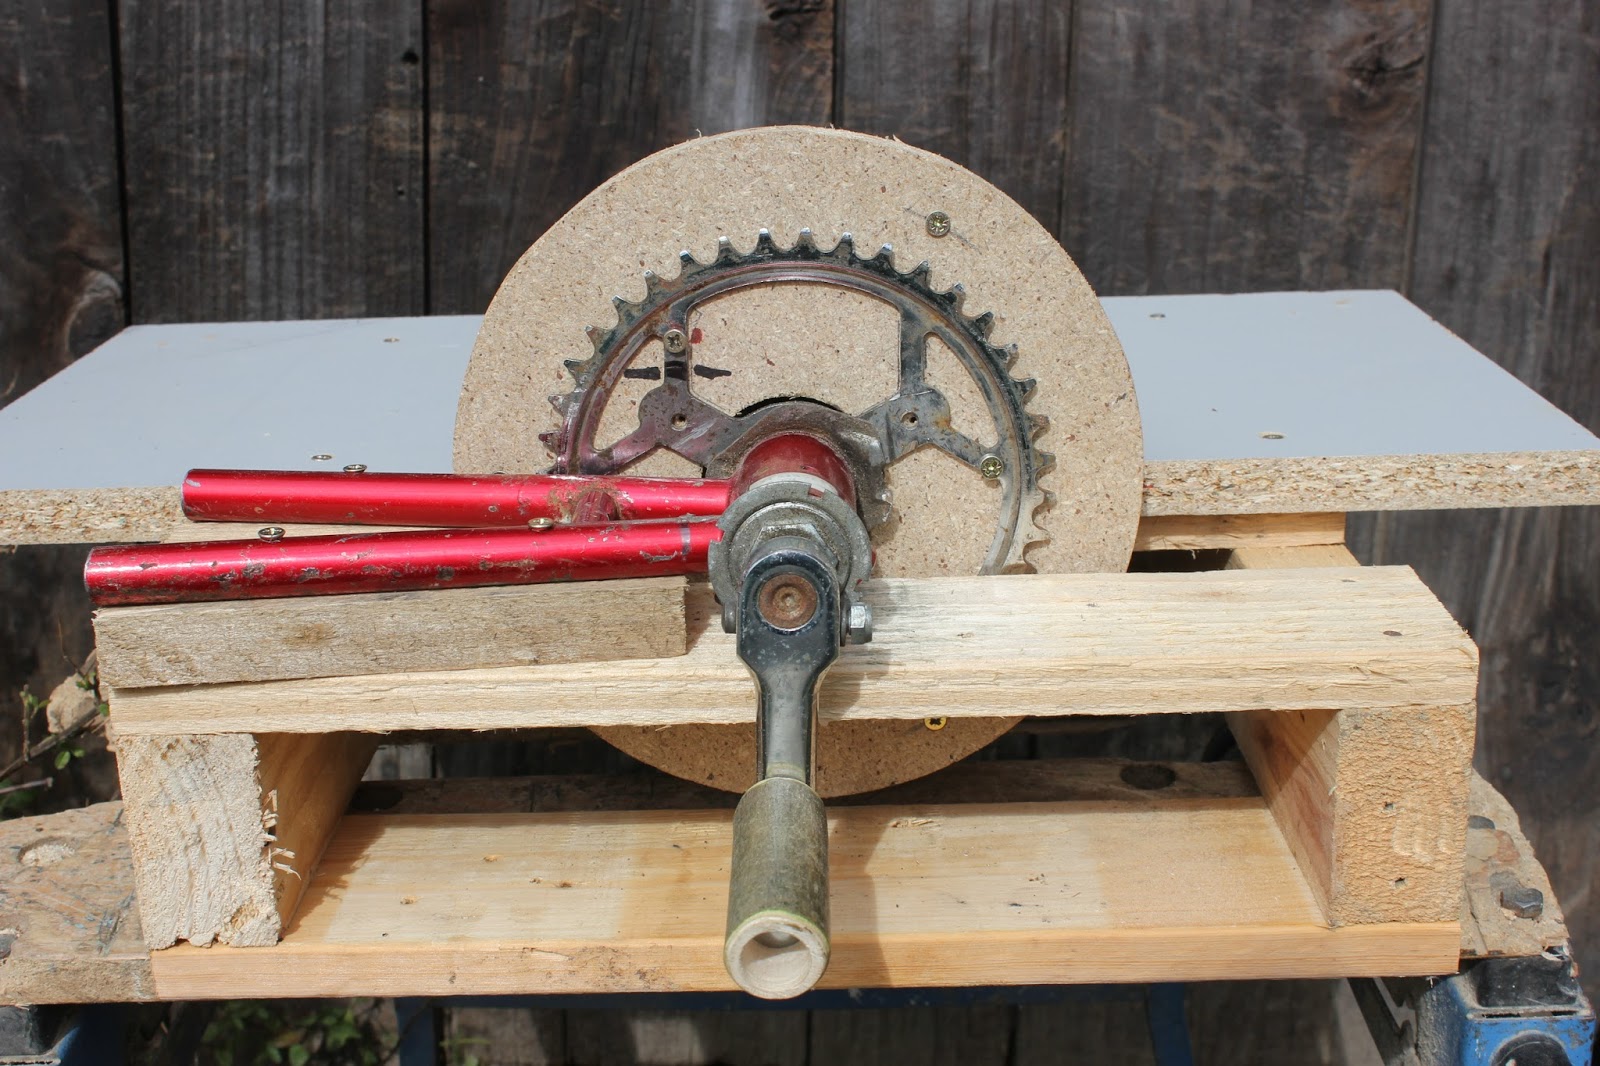 Home-made tools from dead bicycles - Hand-powered Sander ...